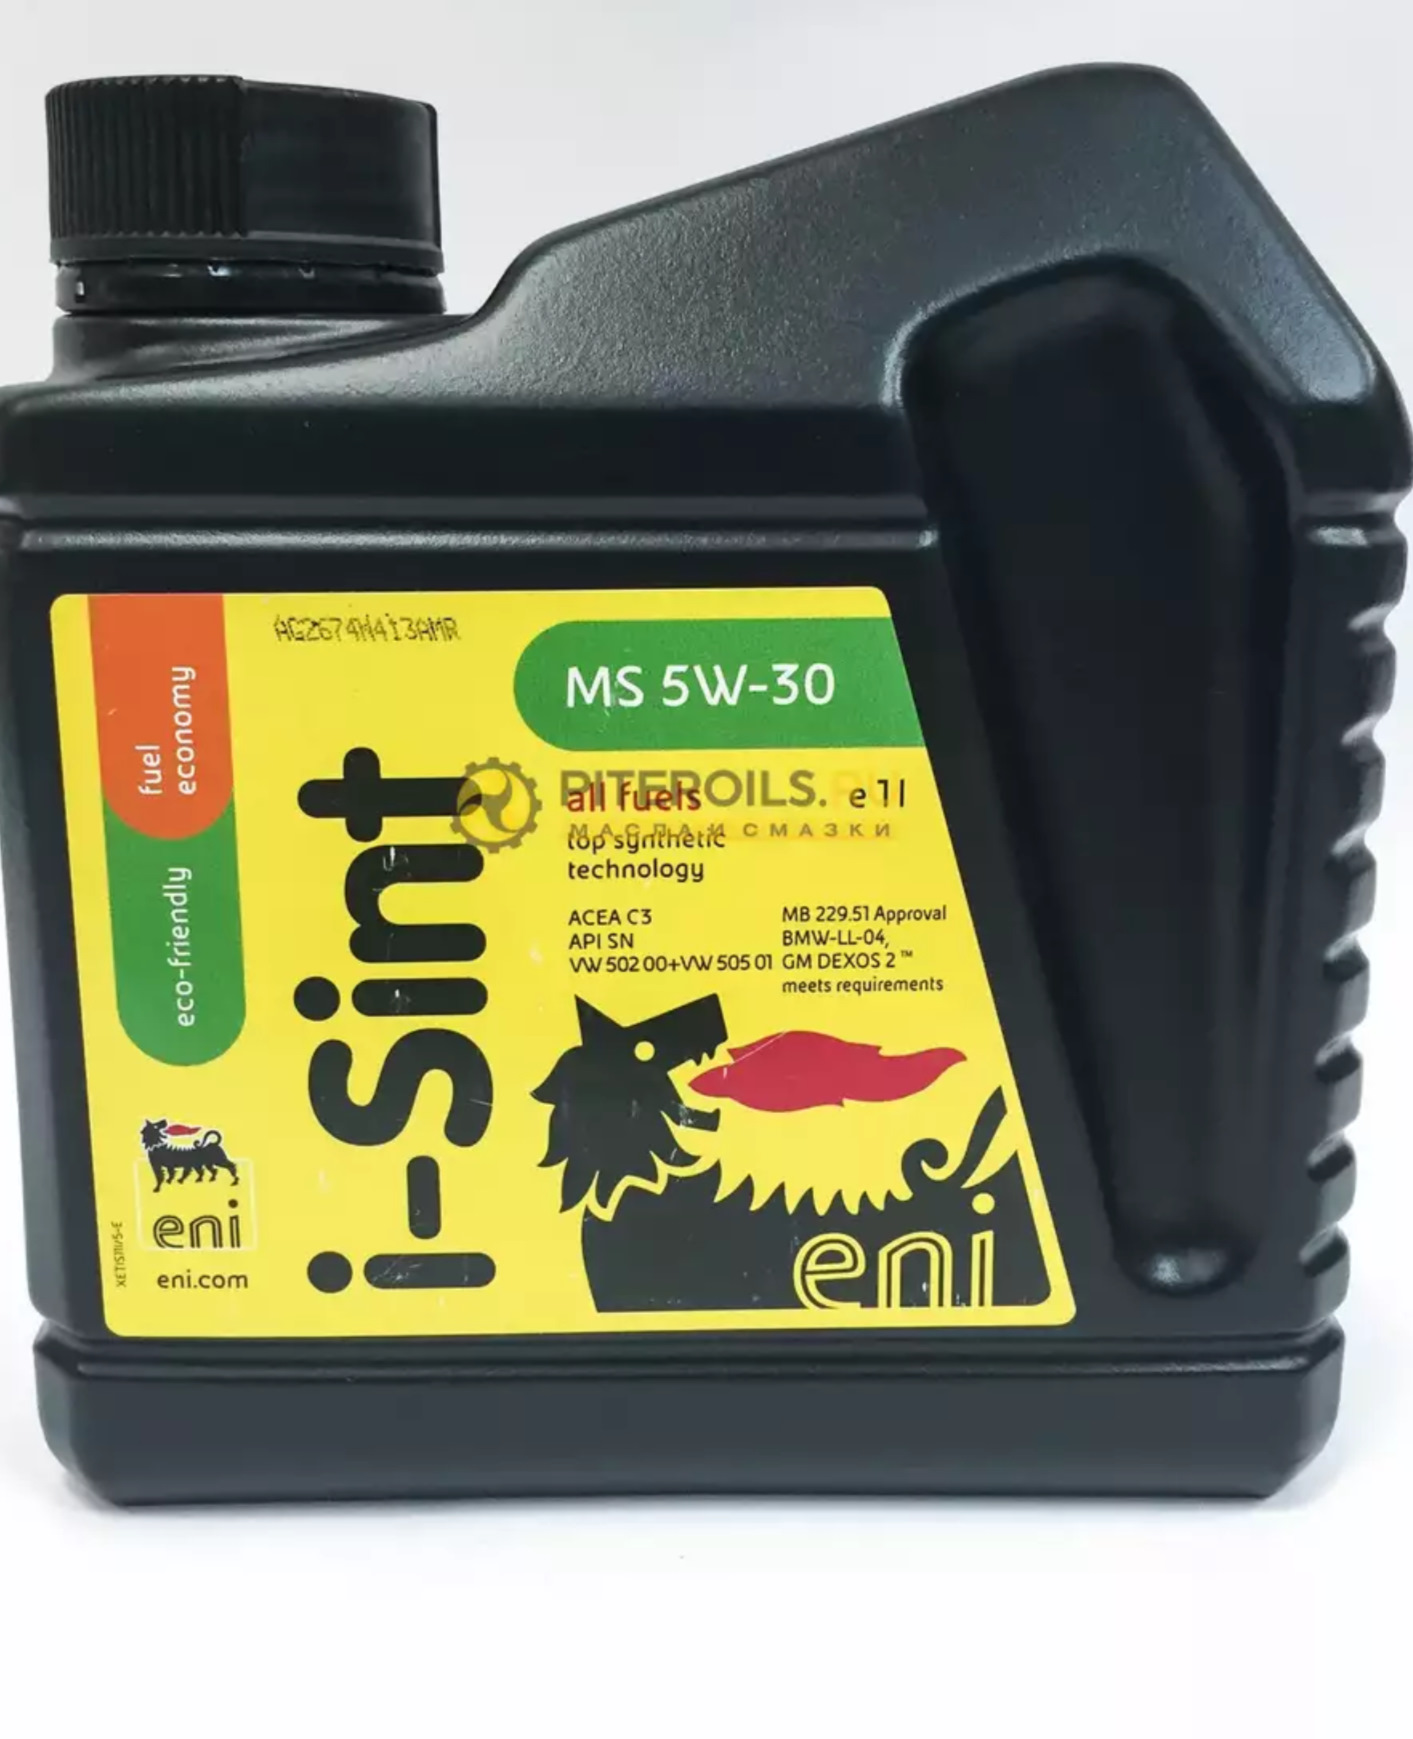 Масло eni 5w 30. Моторное масло Eni 5w-30. Eni i-Sint MS 5w30 (1л)102181. Eni i-Sint Mid SAPS 5w-30 Top. Eni i-Sint MS 5w30 4л.